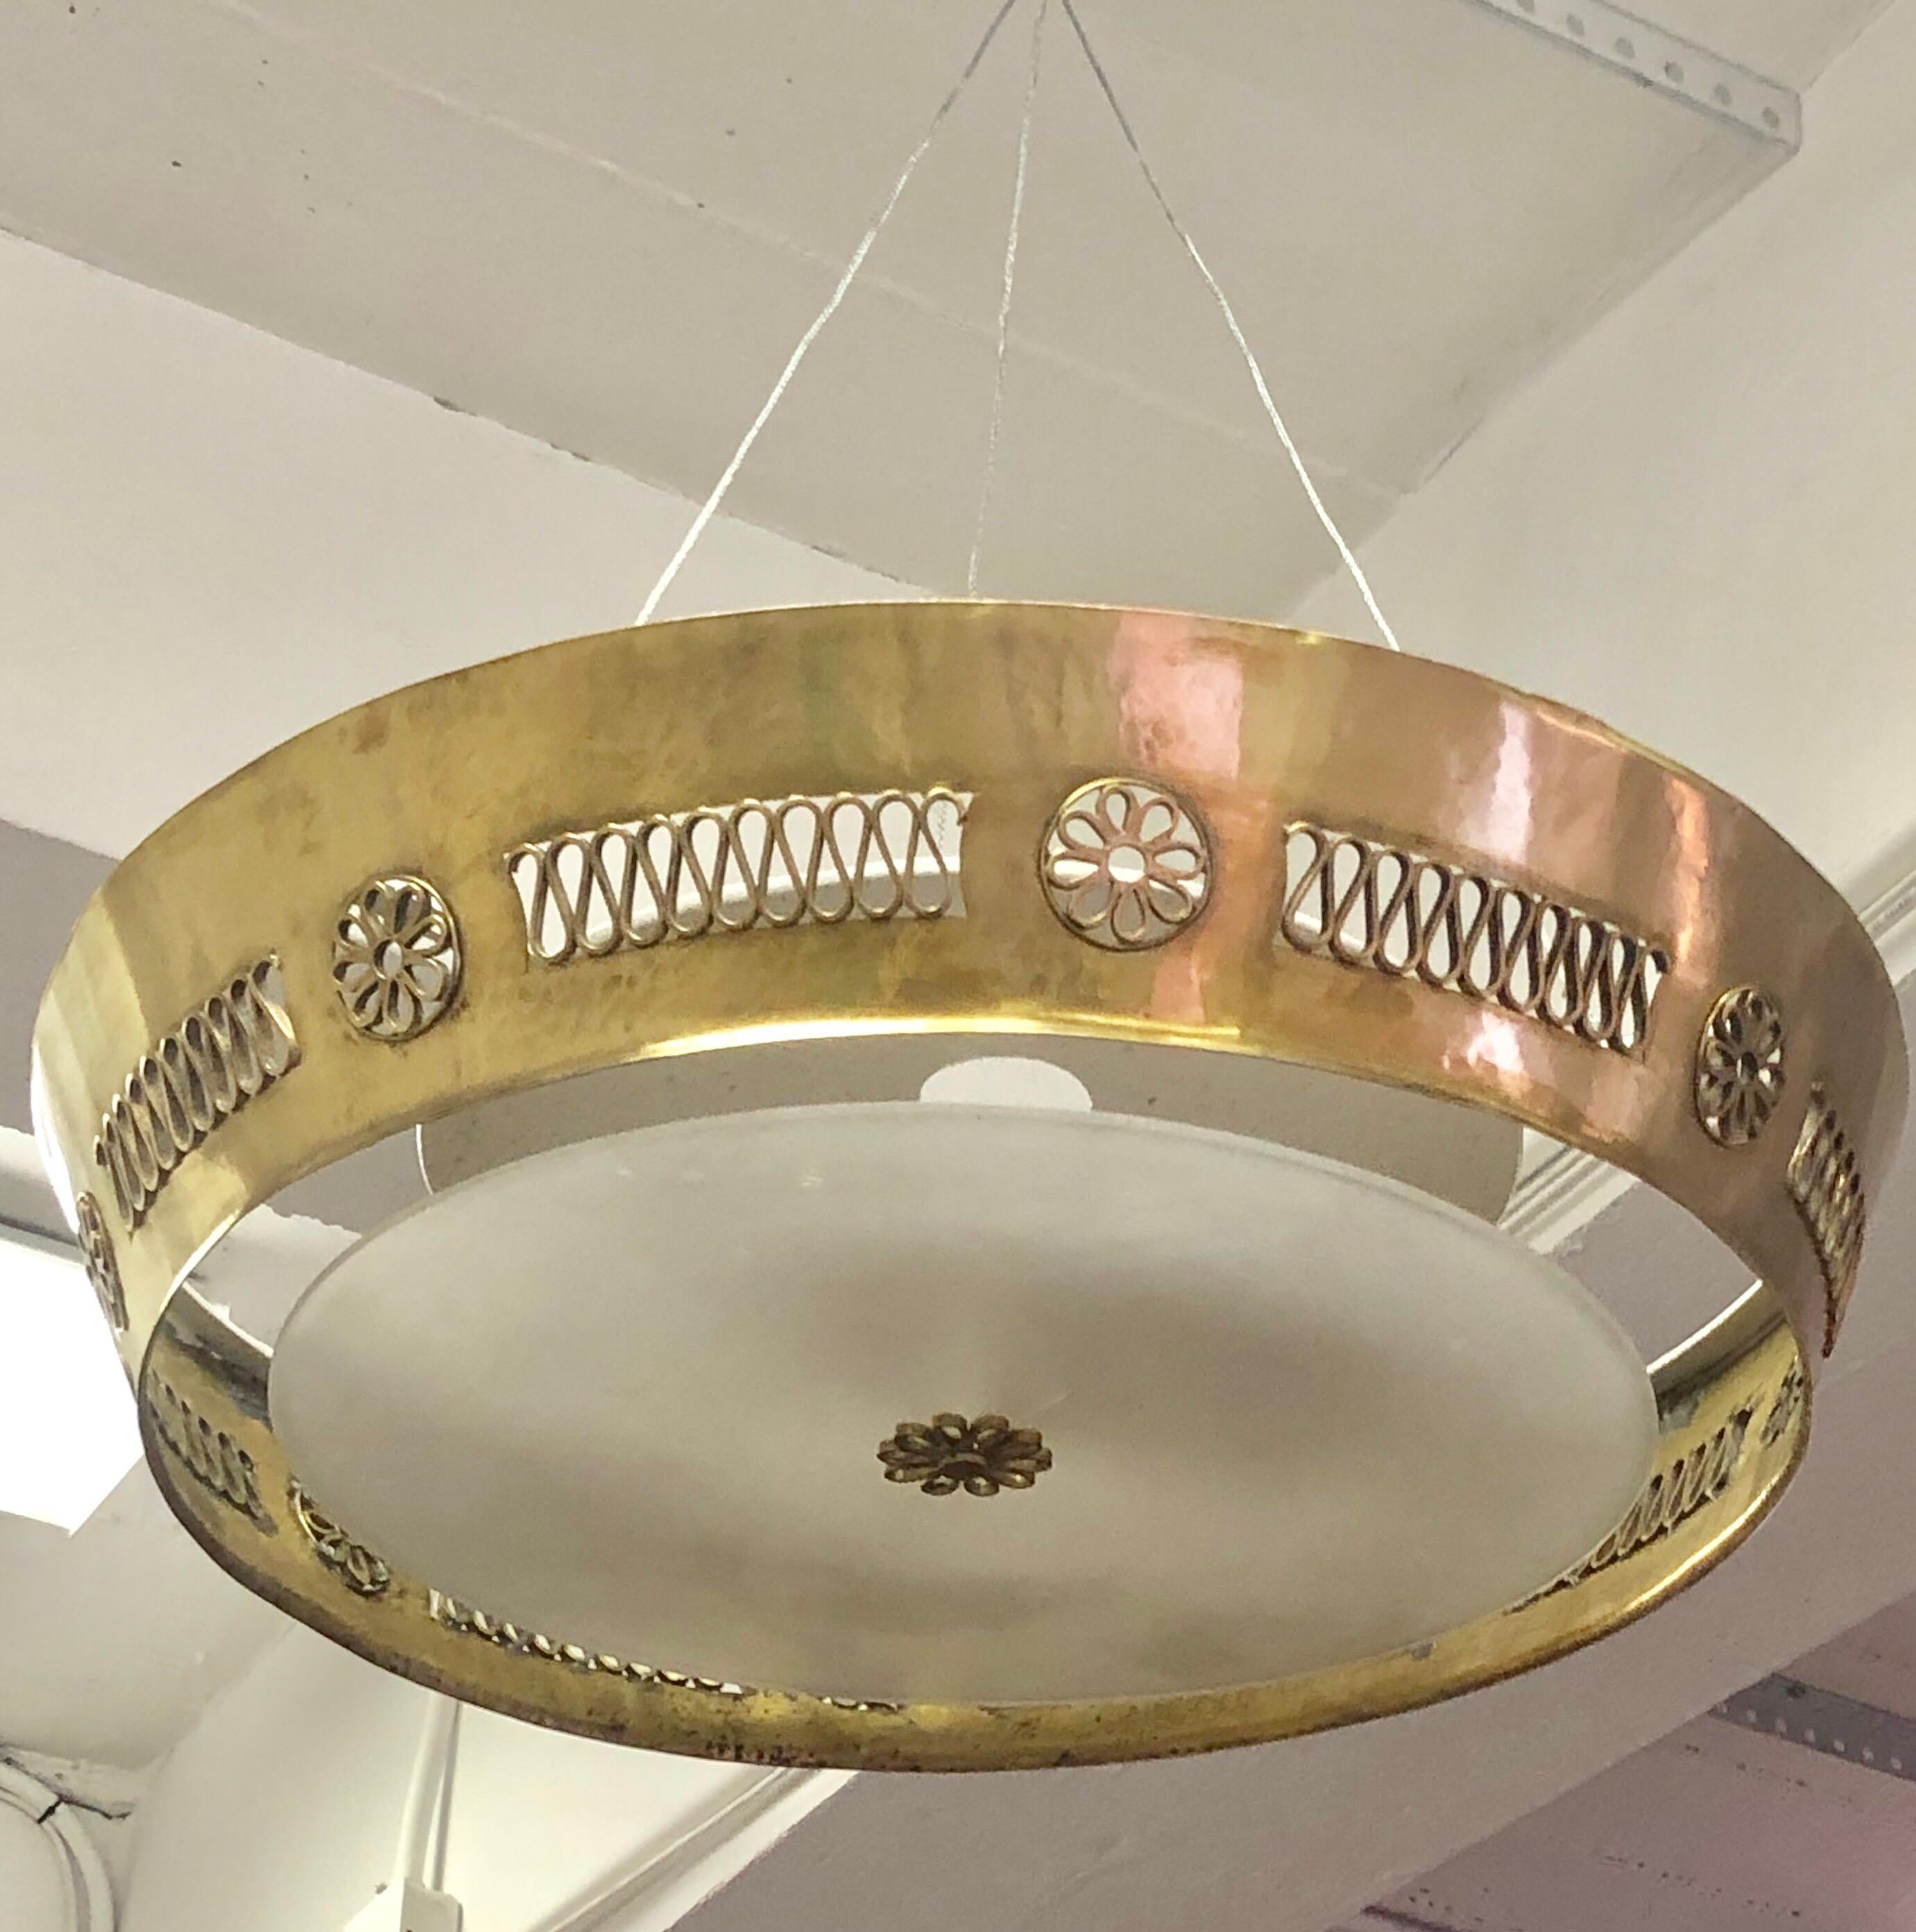 Large, elegant, Italian modern neoclassical, hand-hammered solid brass pendant or flush mount fixture attributed to Pietro Chiesa for Fontana Arte. 

This timeless piece is handmade with a round solid brass frame that has been delicately